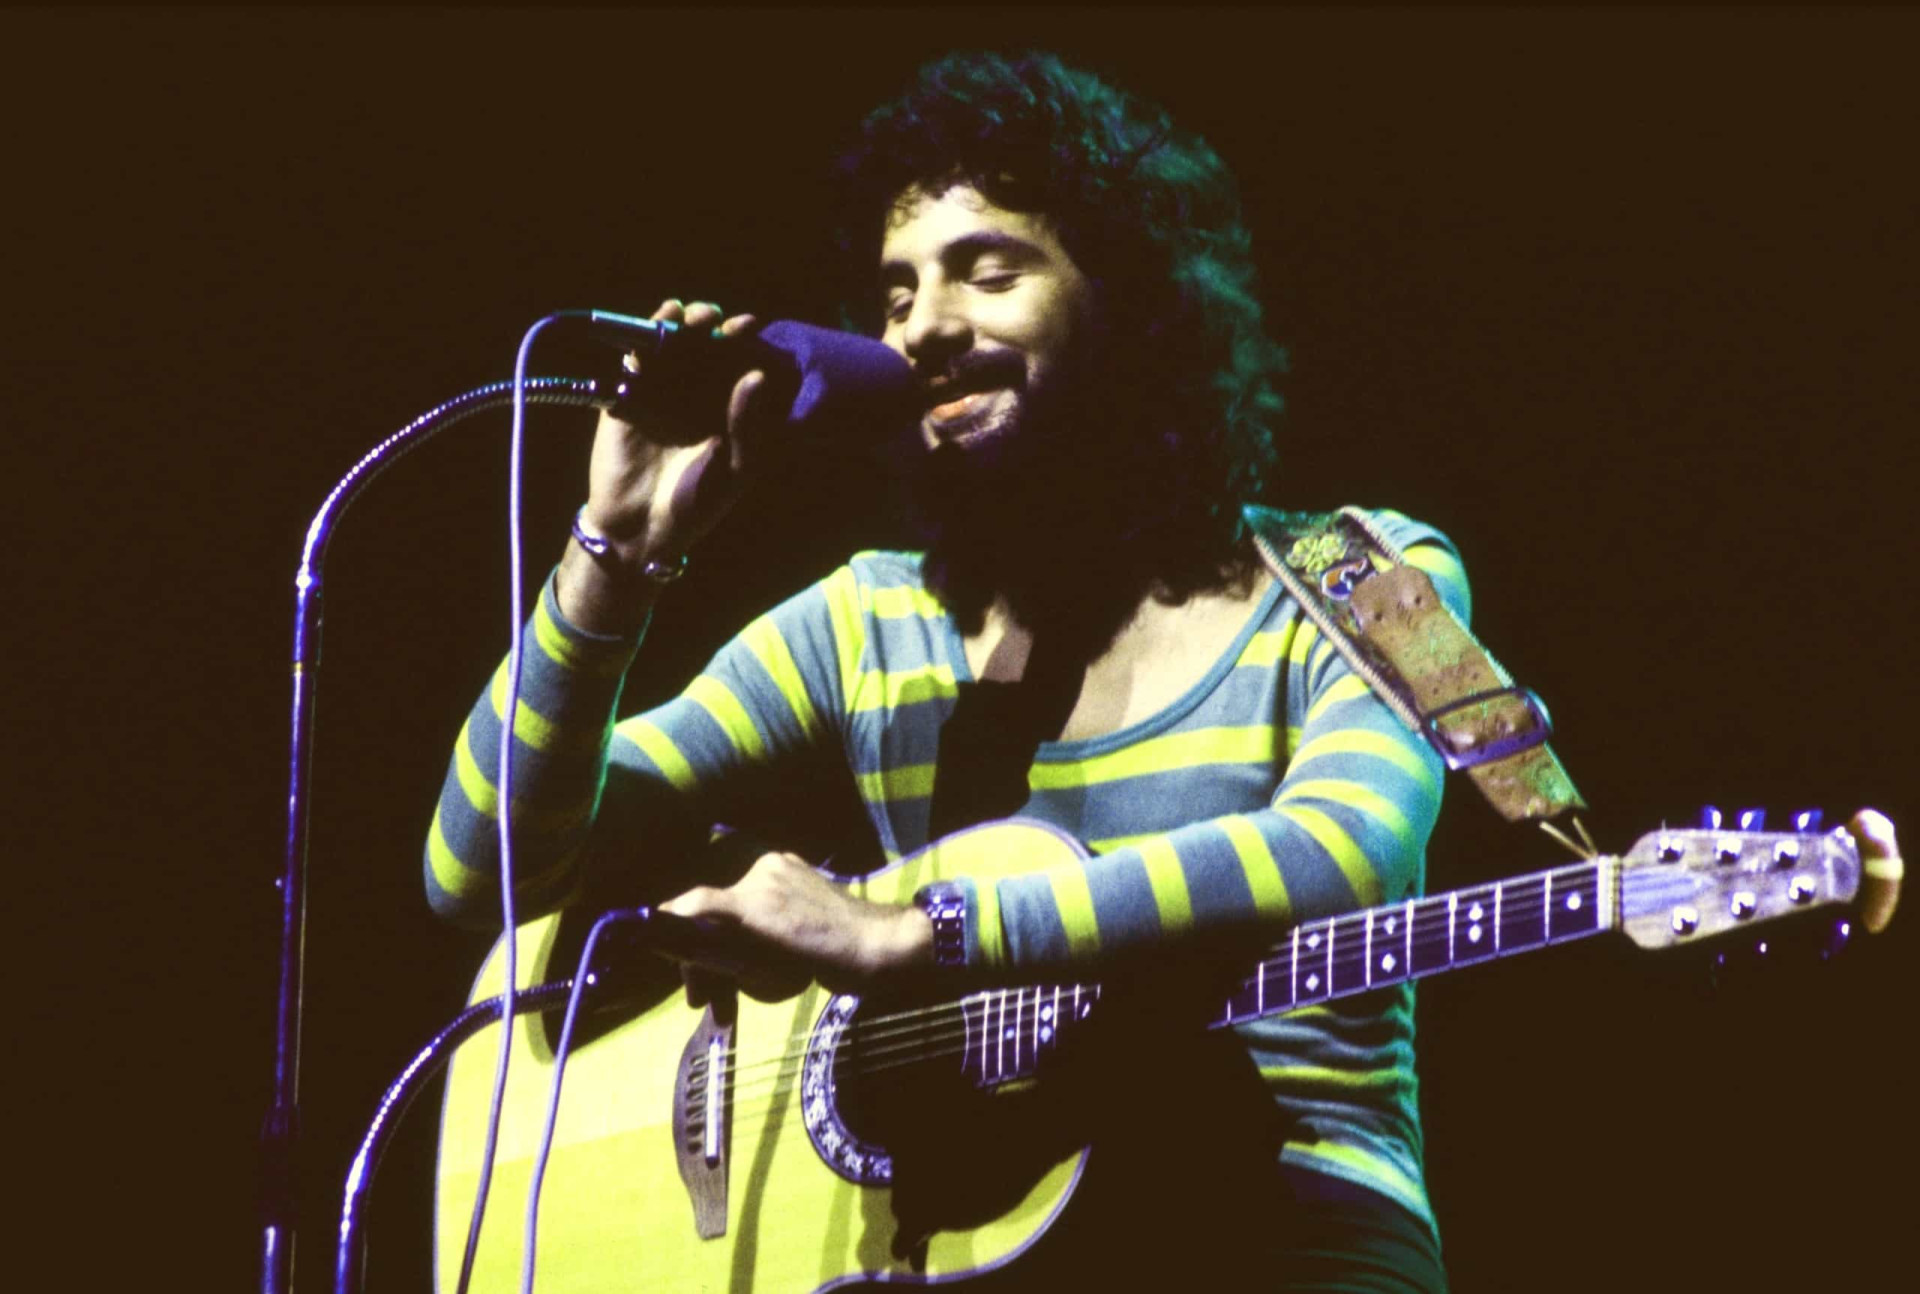 <p>'I Love My Dog' was the first single released by British singer-songwriter Cat Stevens, in 1971. The song appeared the following year on his debut album 'Matthew and Son.' Stevens is today known as Yusuf Islam.</p><p><a href="https://www.msn.com/en-my/community/channel/vid-7xx8mnucu55yw63we9va2gwr7uihbxwc68fxqp25x6tg4ftibpra?cvid=94631541bc0f4f89bfd59158d696ad7e">Follow us and access great exclusive content every day</a></p>